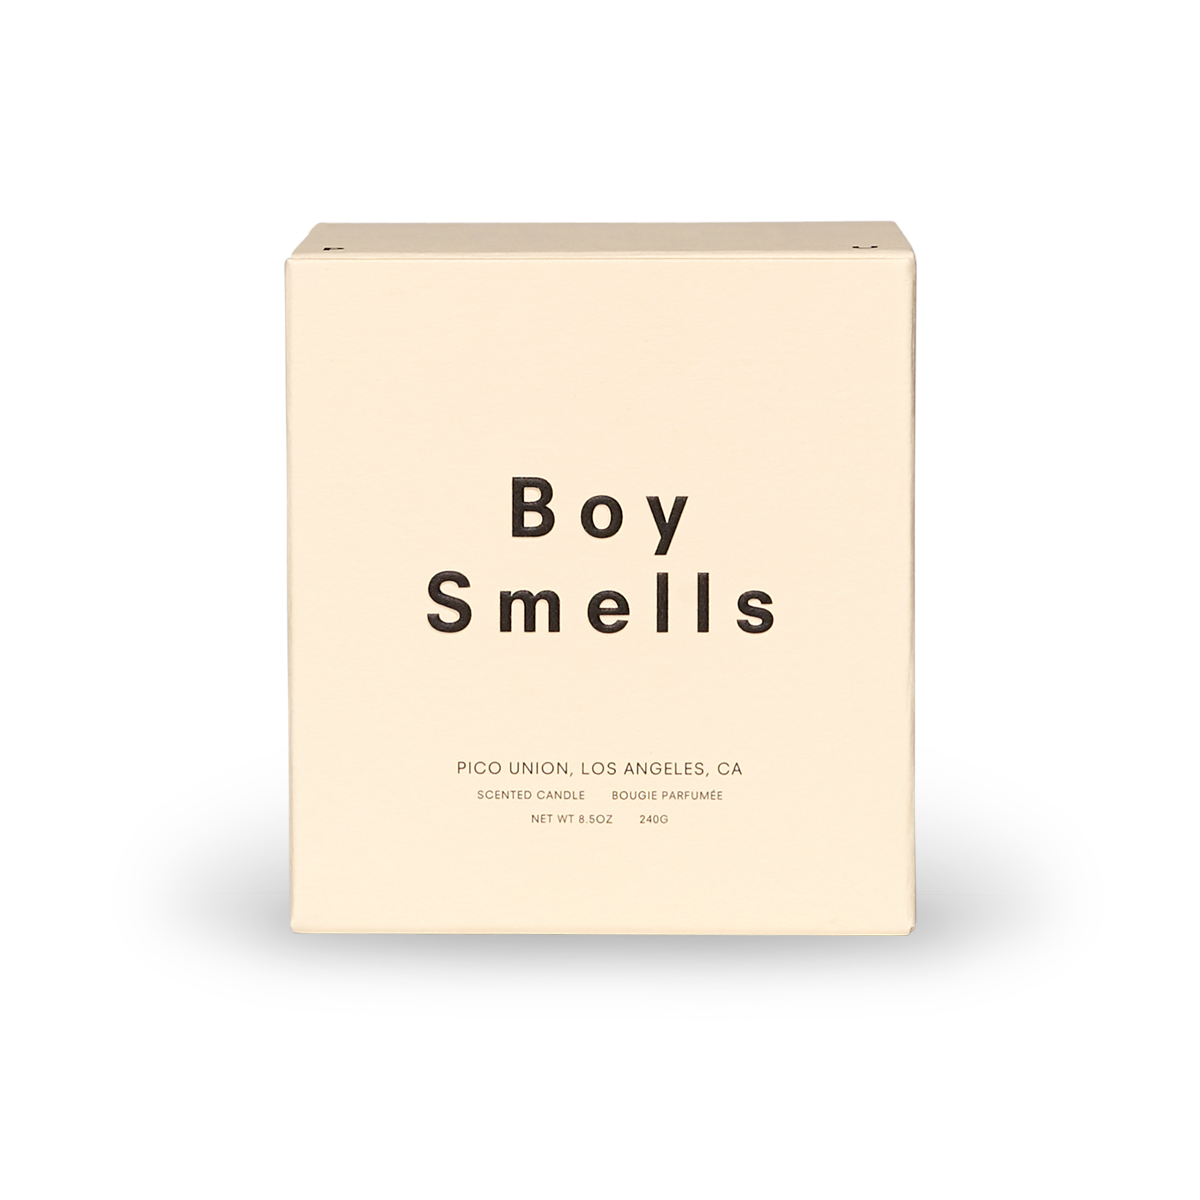 Boy Smells | Cashmere Kush Candle | Prelude & Dawn | Los Angeles, CA